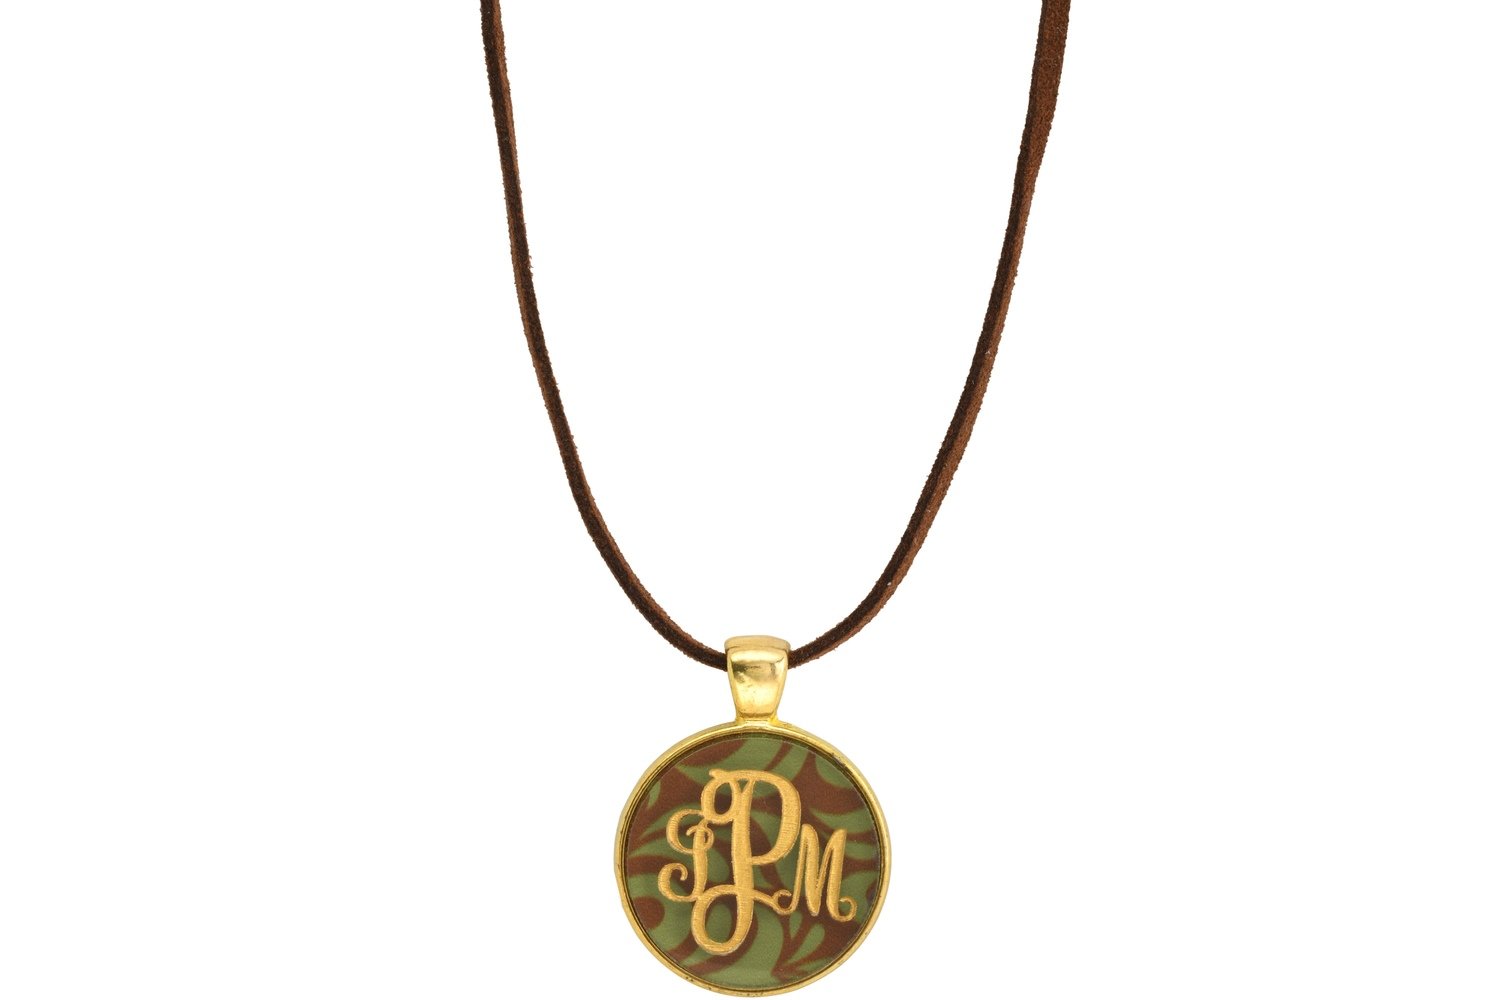 Classic Style Bezel Monogram Pendant with Suede Leather Cord Necklace